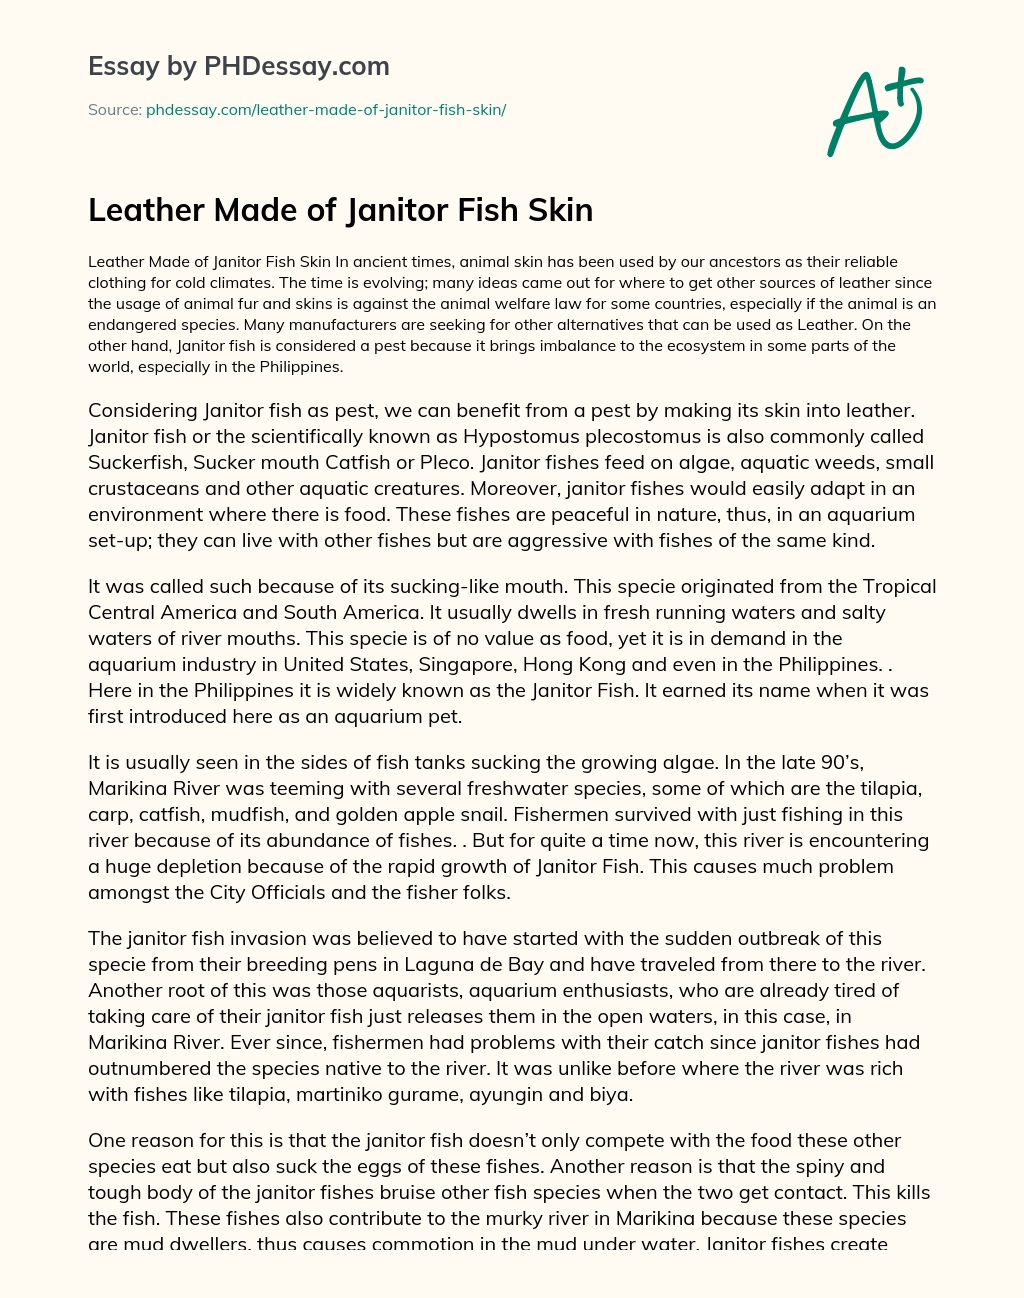 Leather Made of Janitor Fish Skin essay